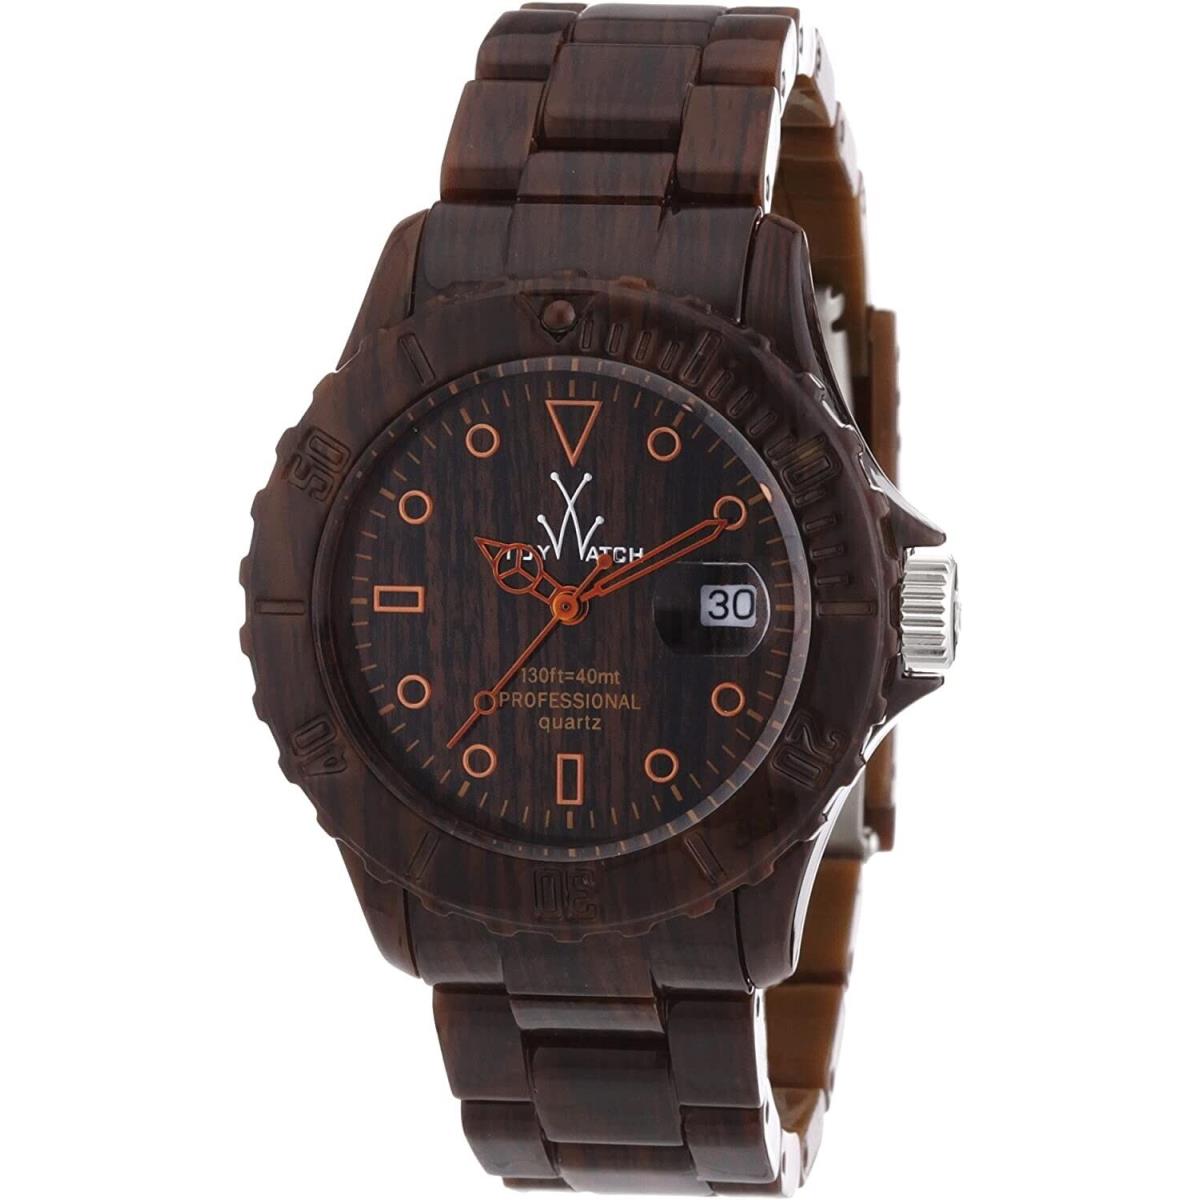 Toywatch Watch Imprint Wood Patterned Brown- FLE01WD